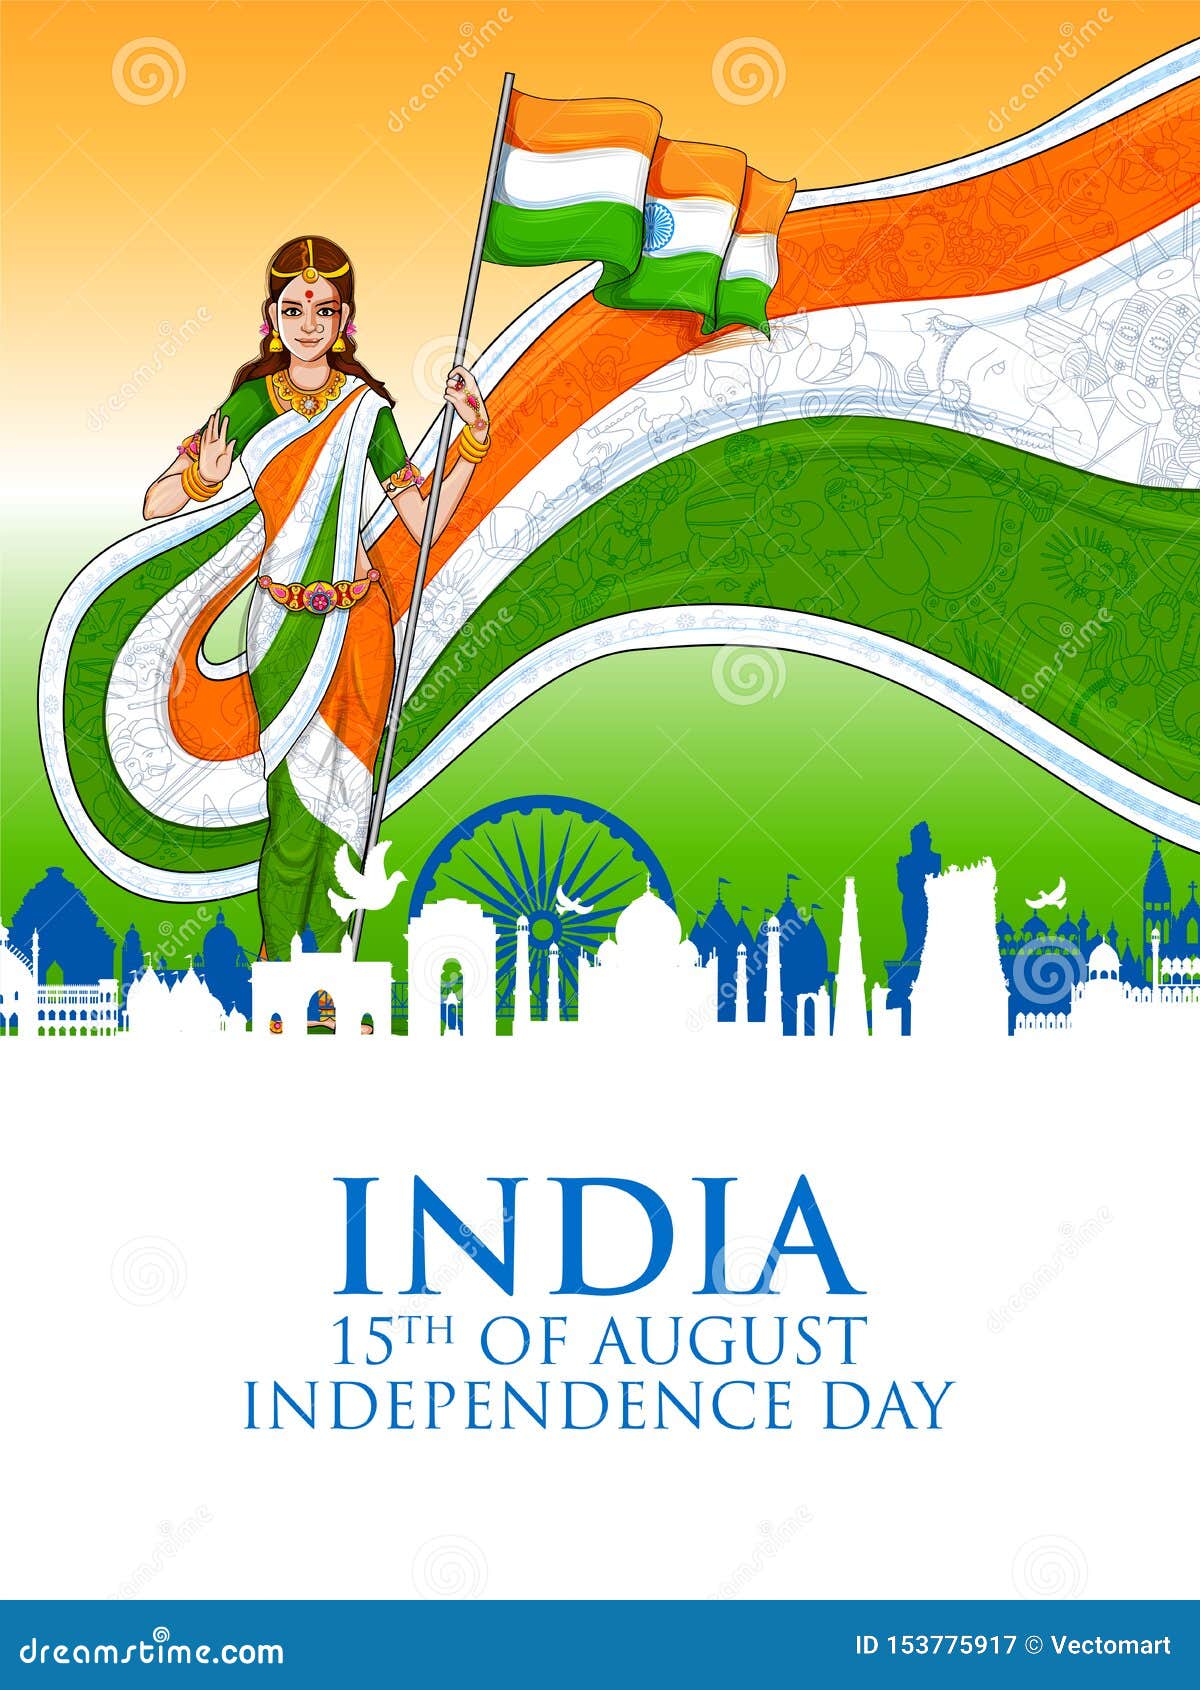 Easy independence day drawing | Independence day drawing, Easy love drawings,  Indian independence day